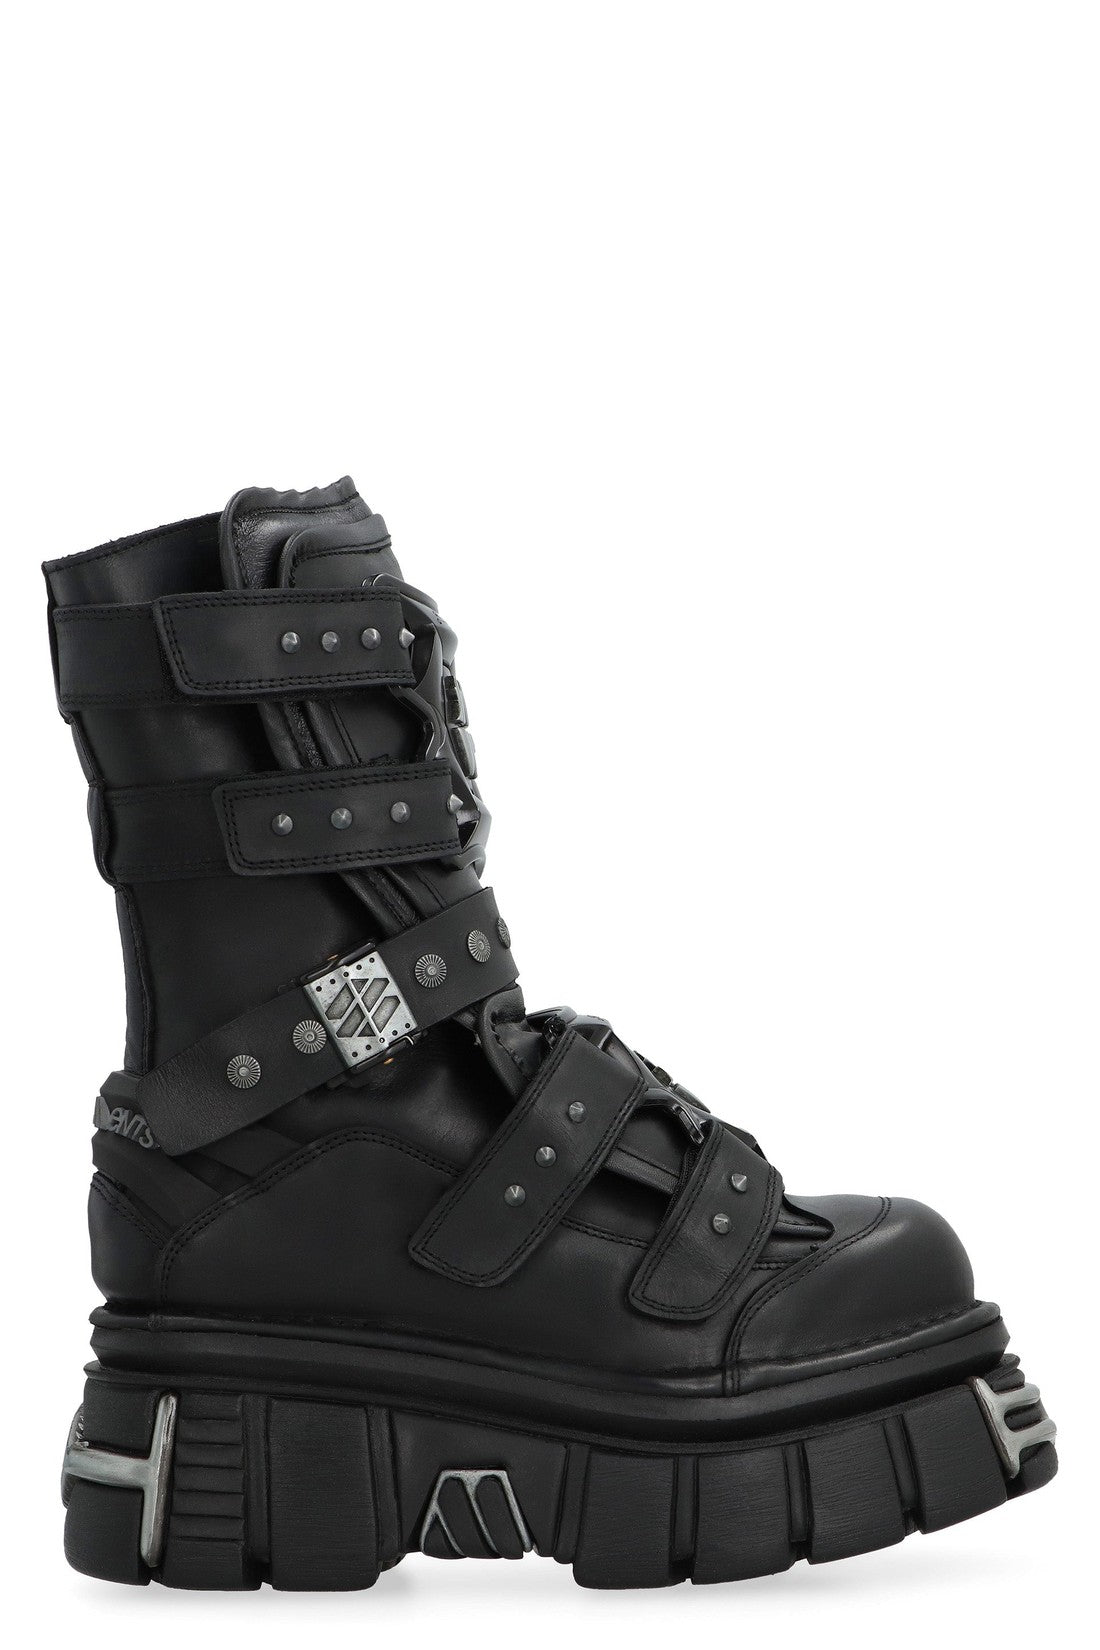 VETEMENTS x New Rock - Leather Gamer boots